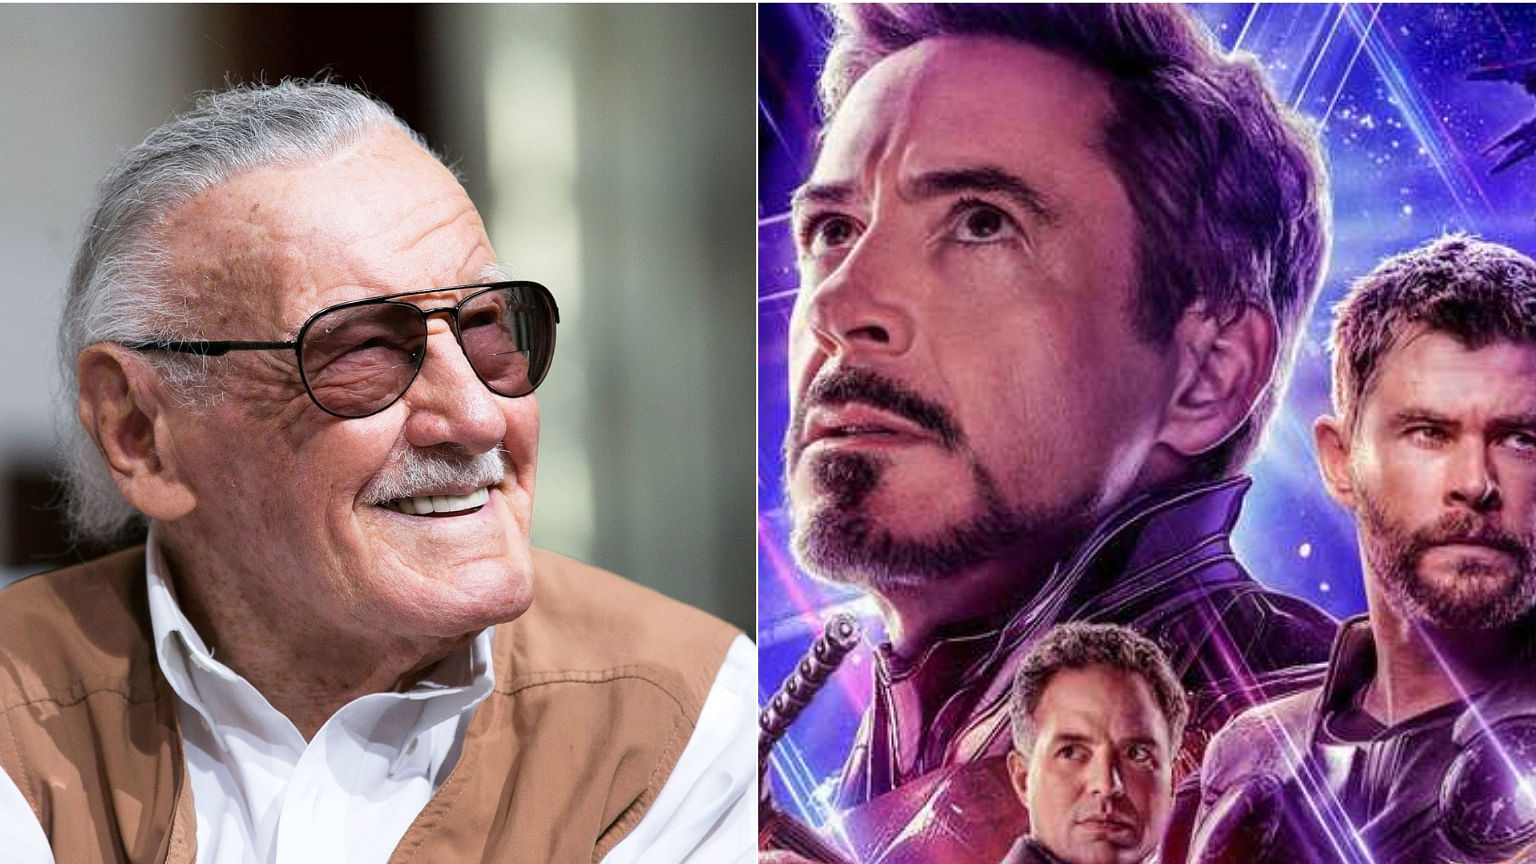 Stan Lee has made cameos in many Marvel movies.